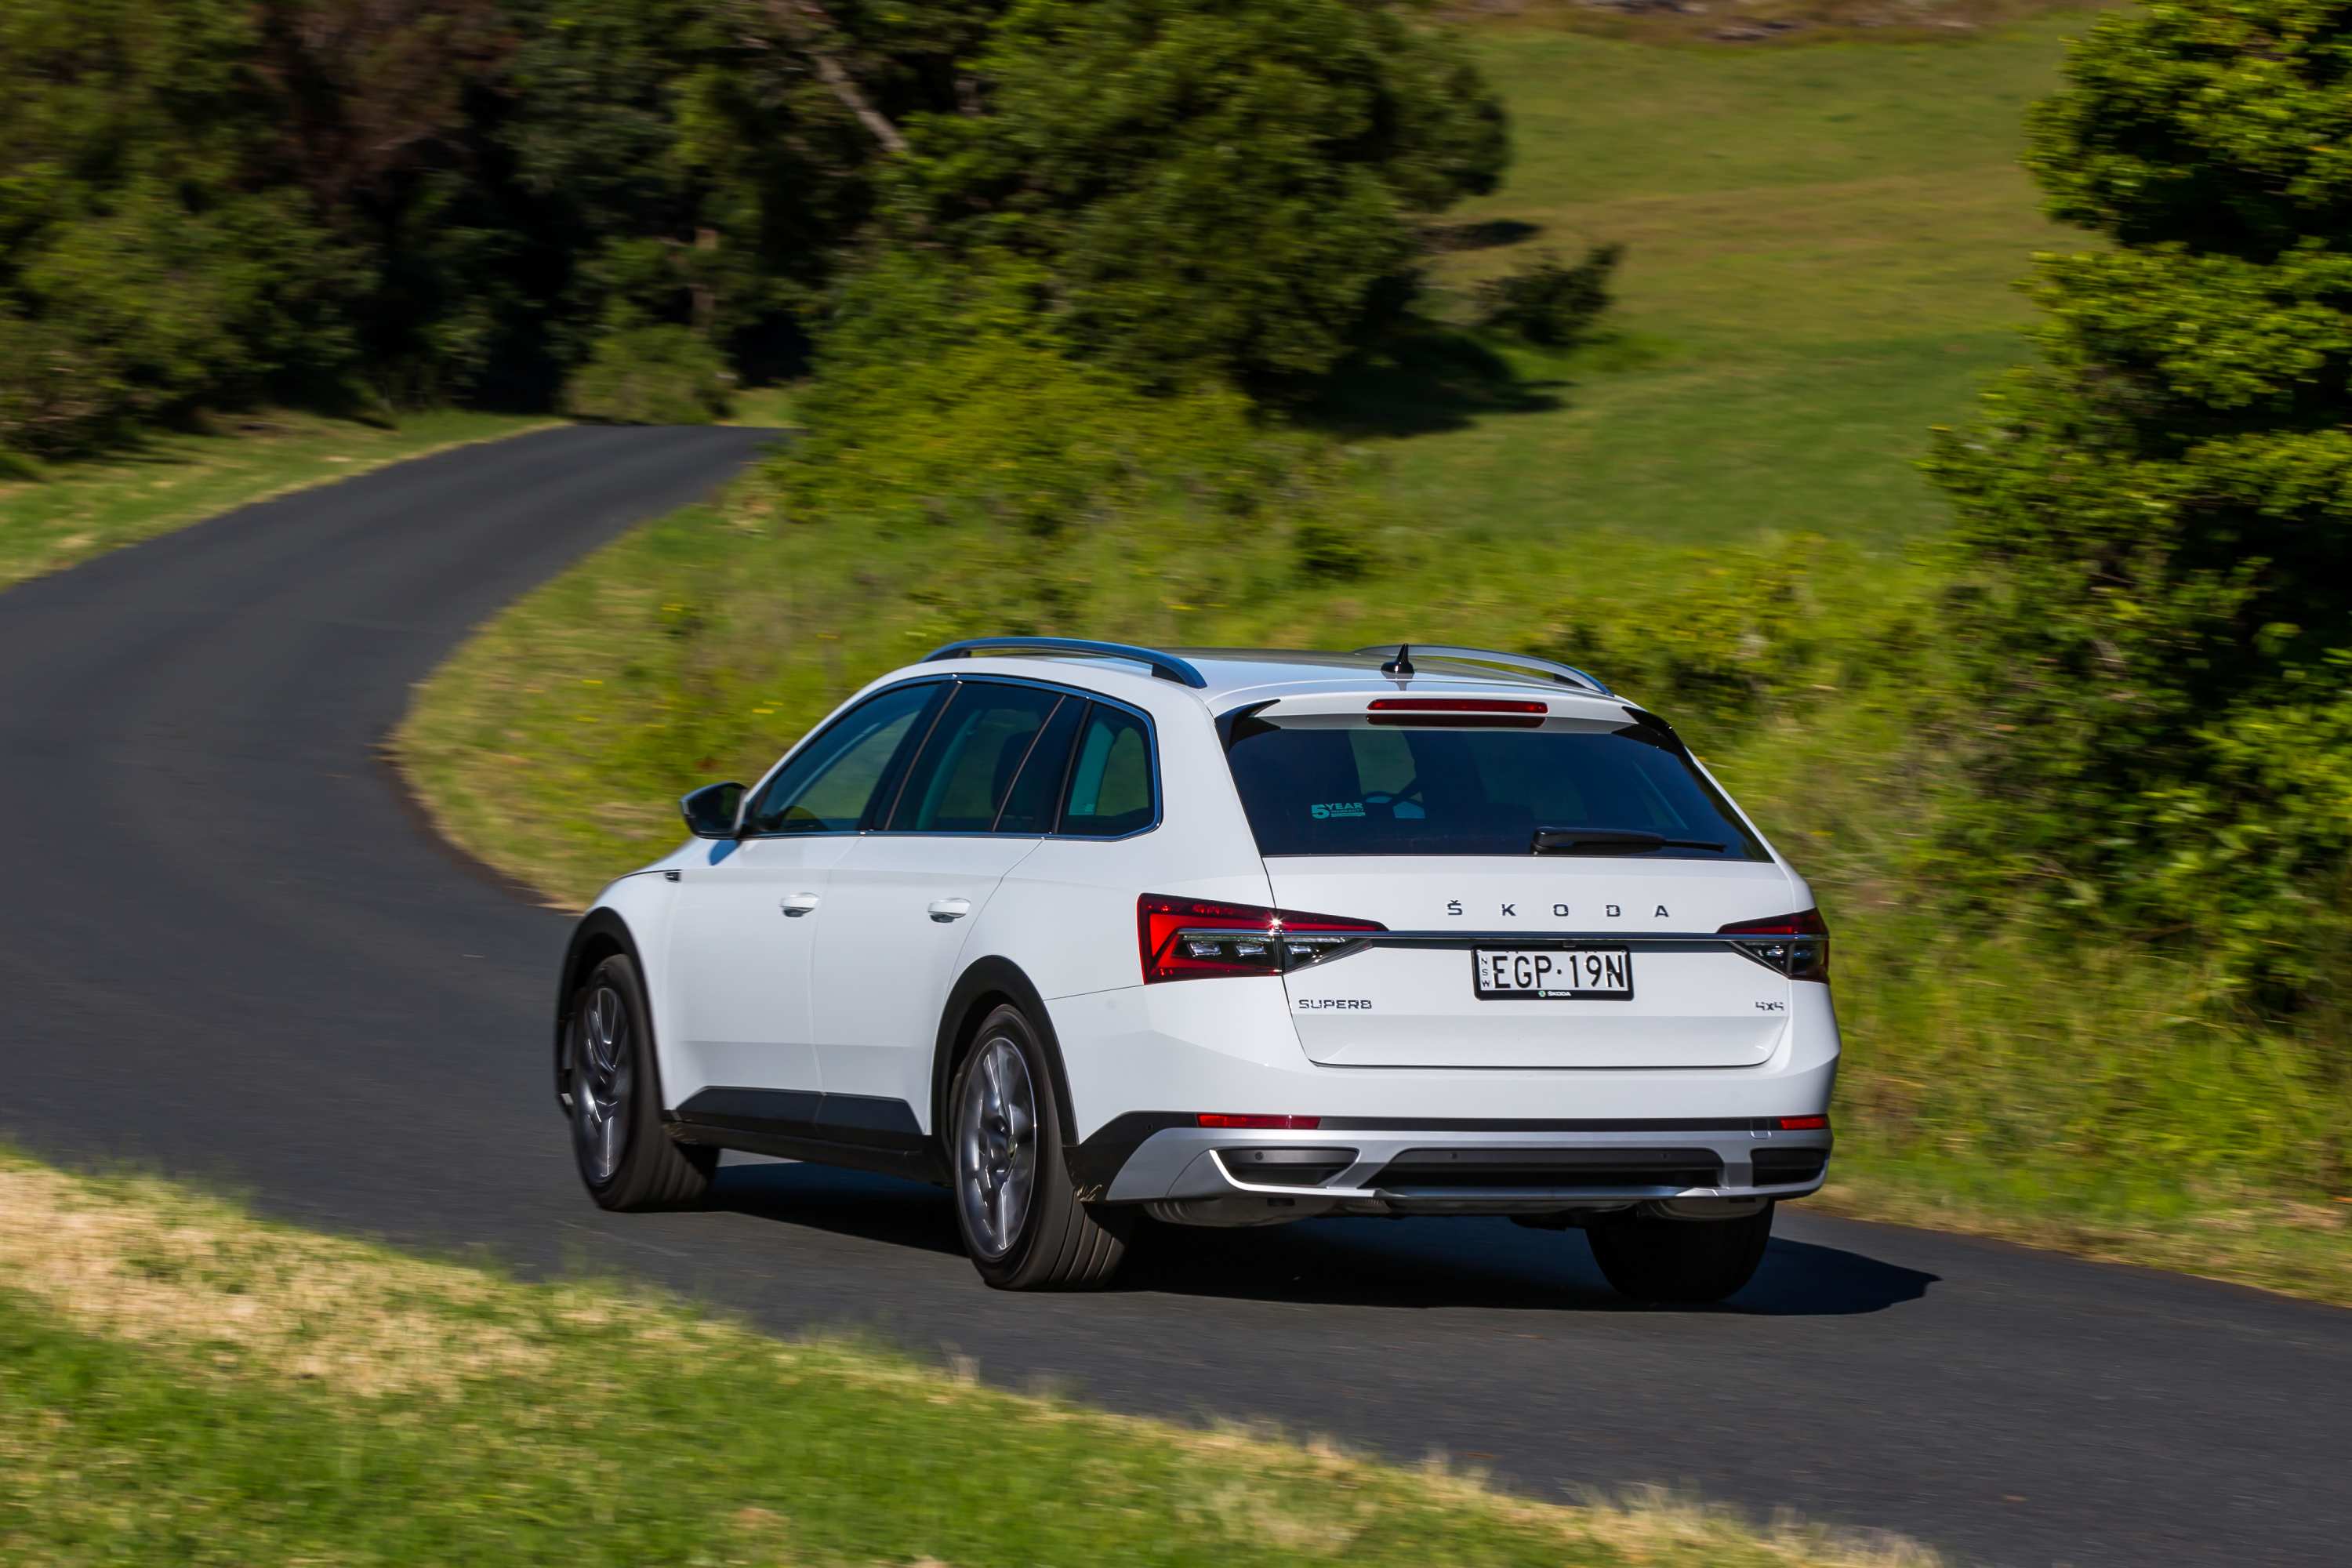 The ŠKODA Superb Scout is equipped with the latest 200kW/350Nm 2.0-litre turbo petrol engine (with petrol particulate filter) that sends power to all four wheels via a seven-speed DQ381 DSG transmission.